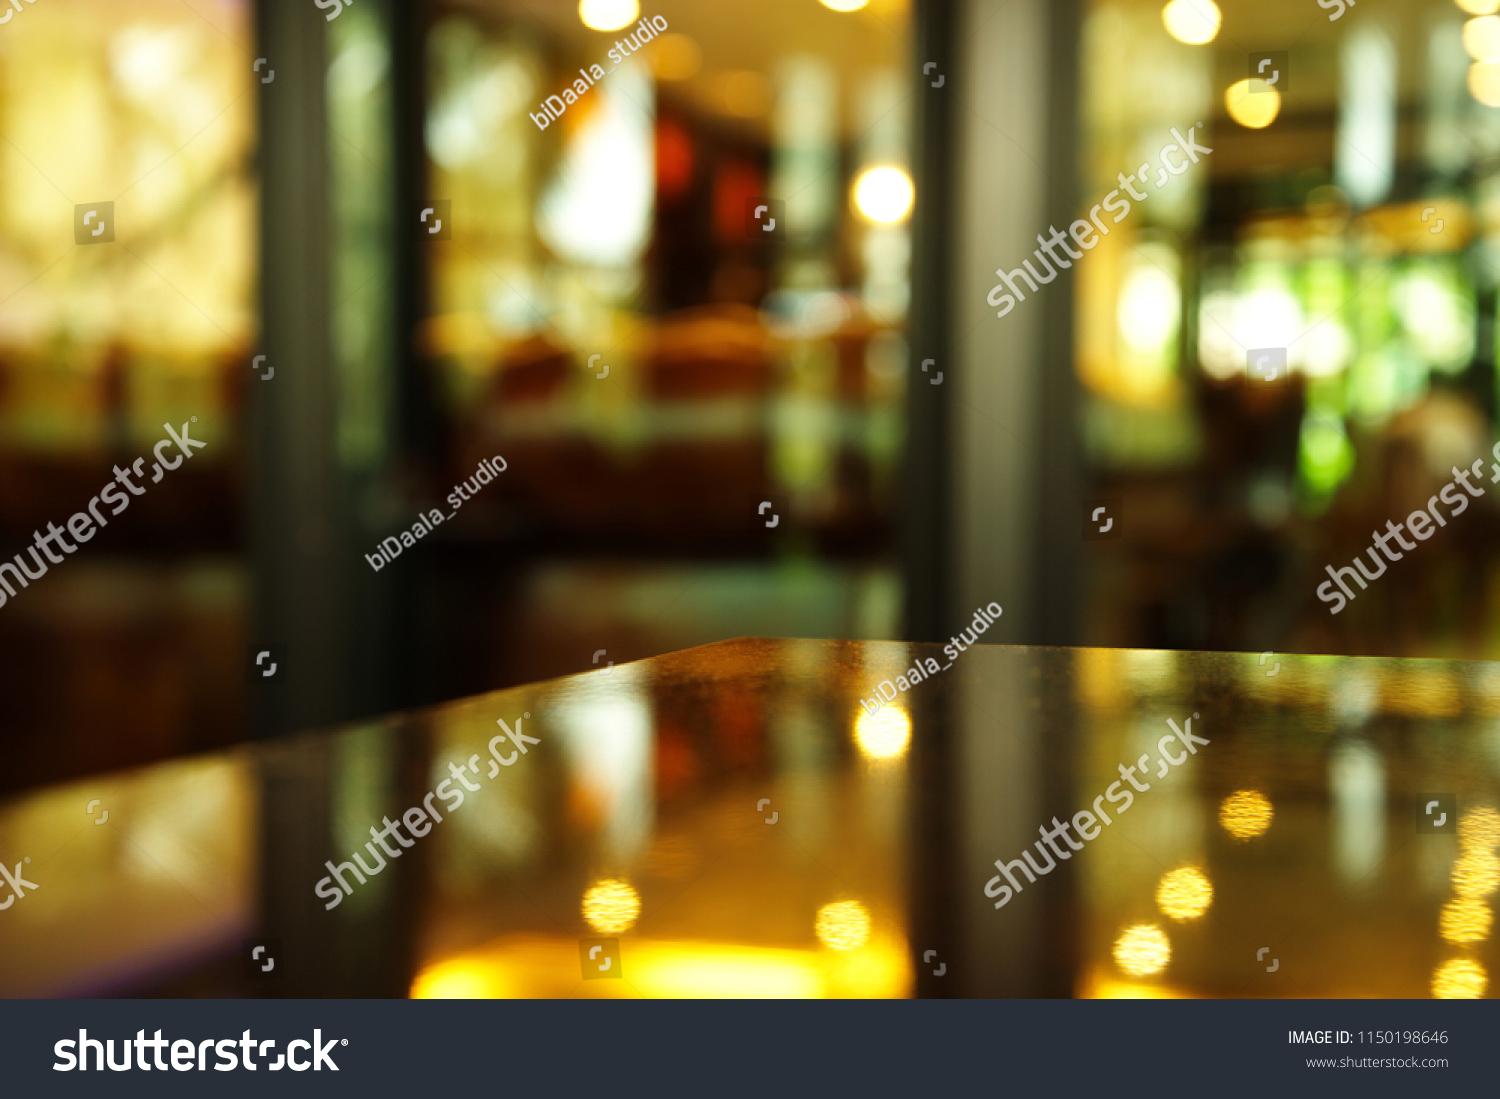 corner of table reflection night light with blur background of pub or bar  #1150198646